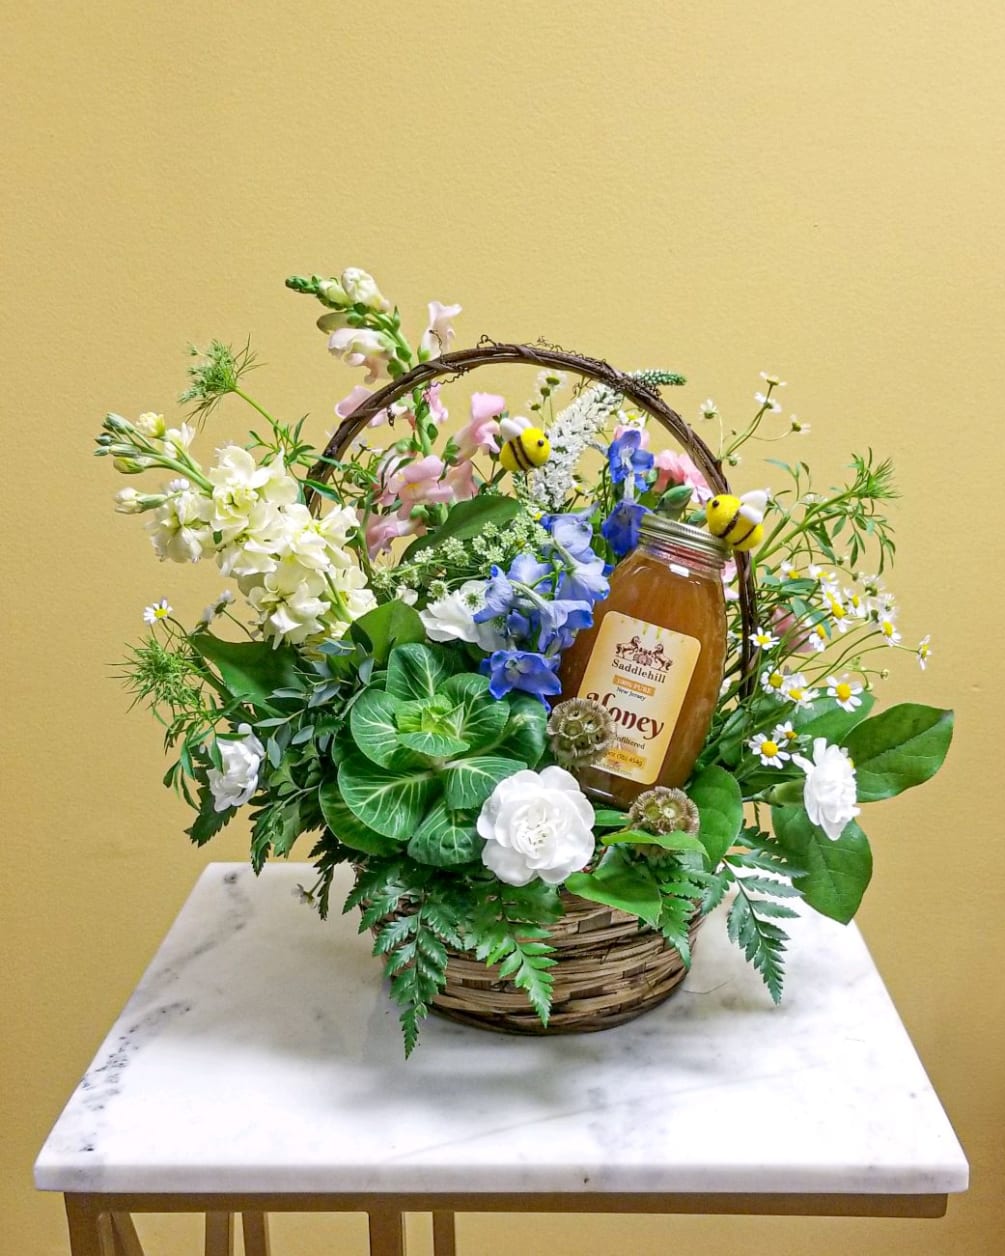 How sweet is this ? A bamboo wicker basket plush with flowers